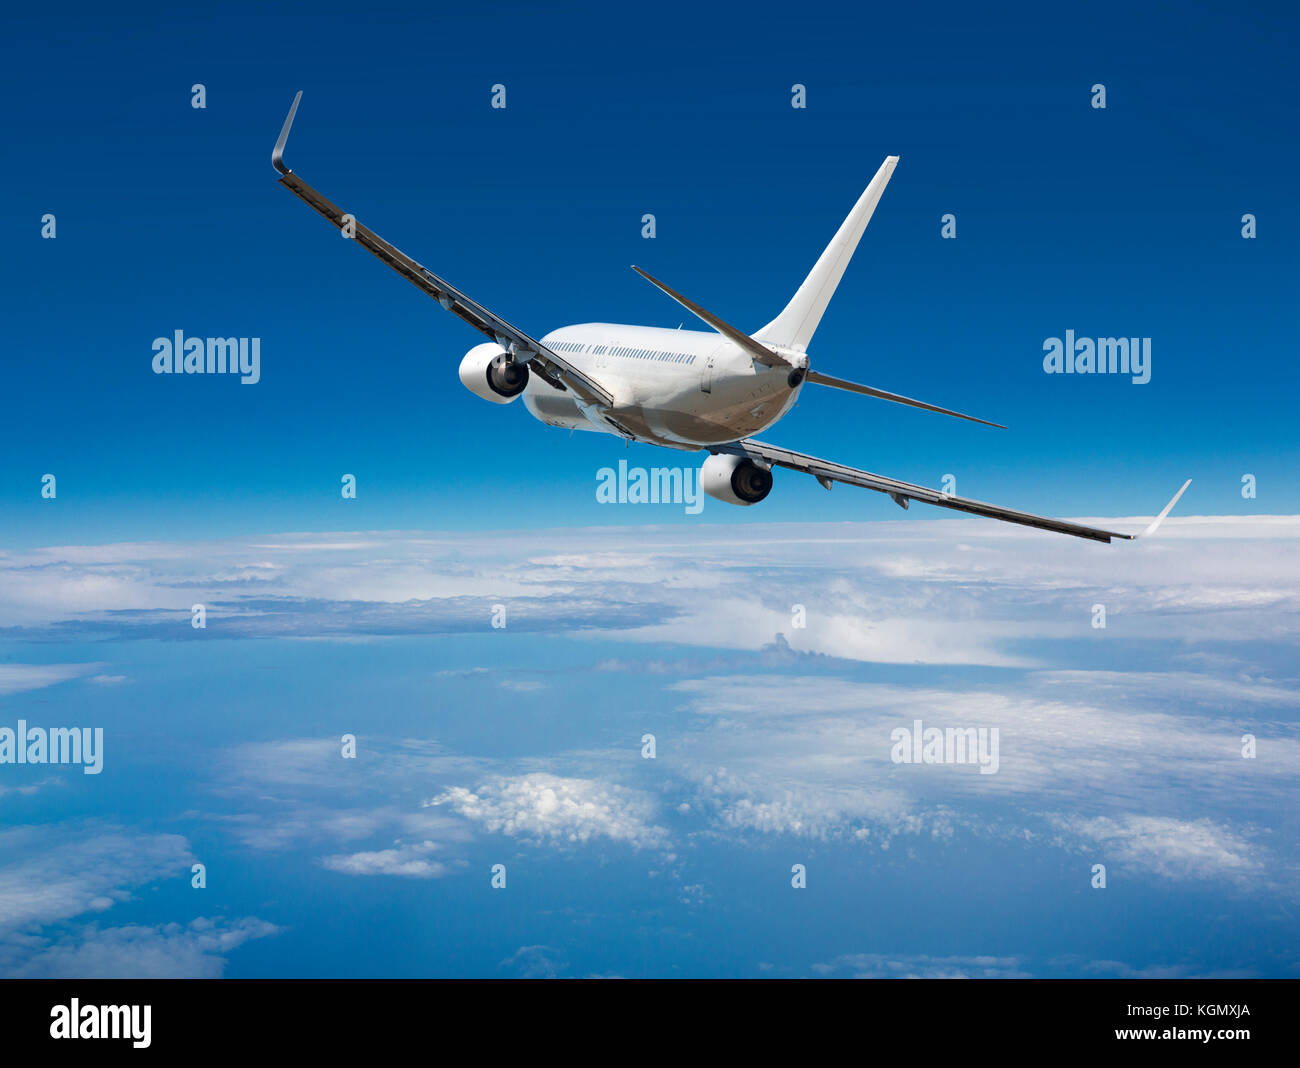 White passenger wide-body plane. Aircraft is flying in blue cloudy sky over the sea. Stock Photo